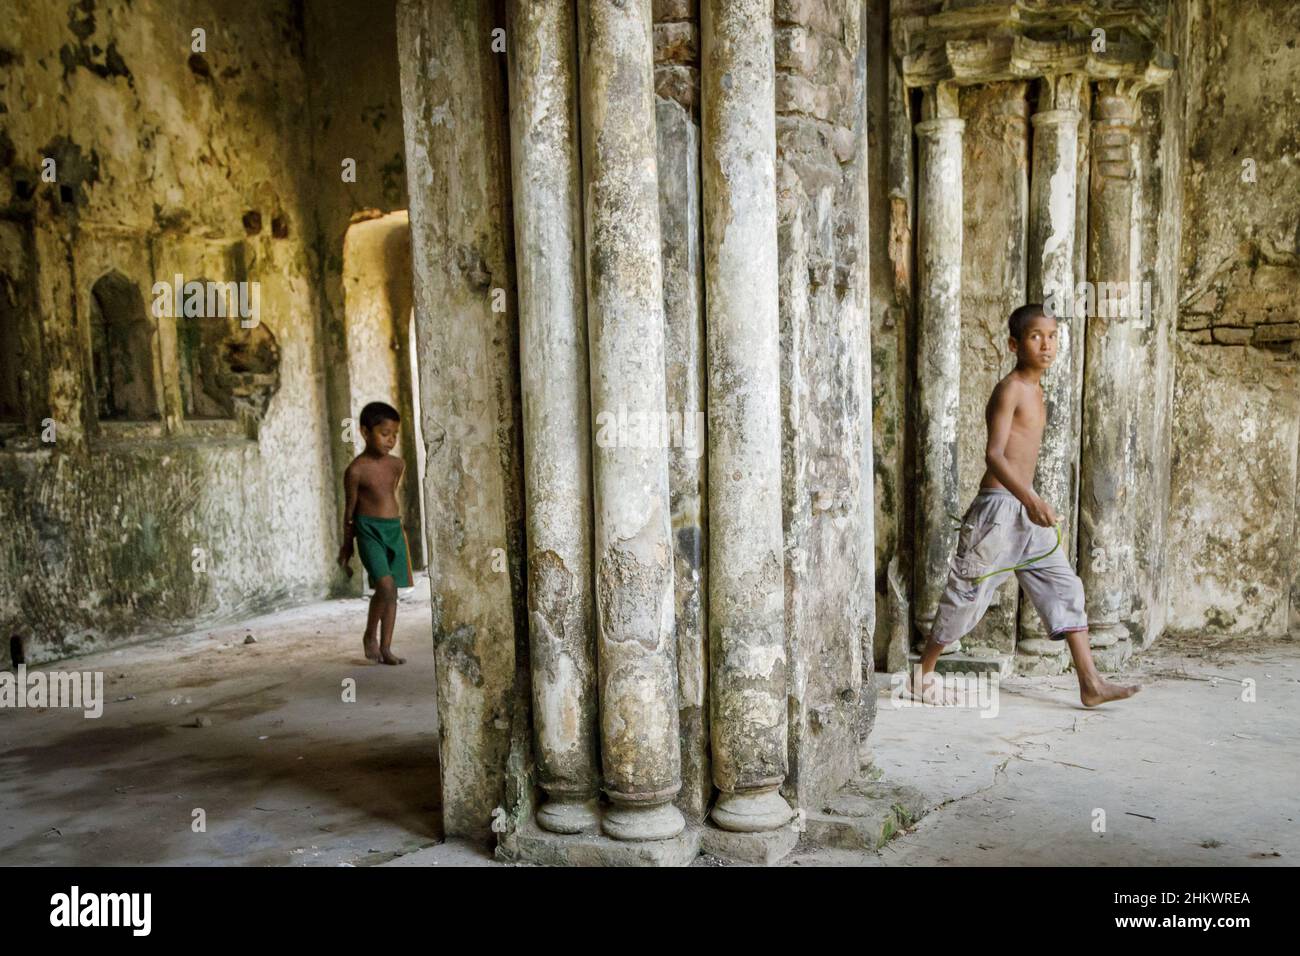 Two young boys playing in the ruins of the Teota Zamindar Palace in the Manikganj district. The palace, believed to be around 300 years old, had more than 50 rooms originally. Stock Photo